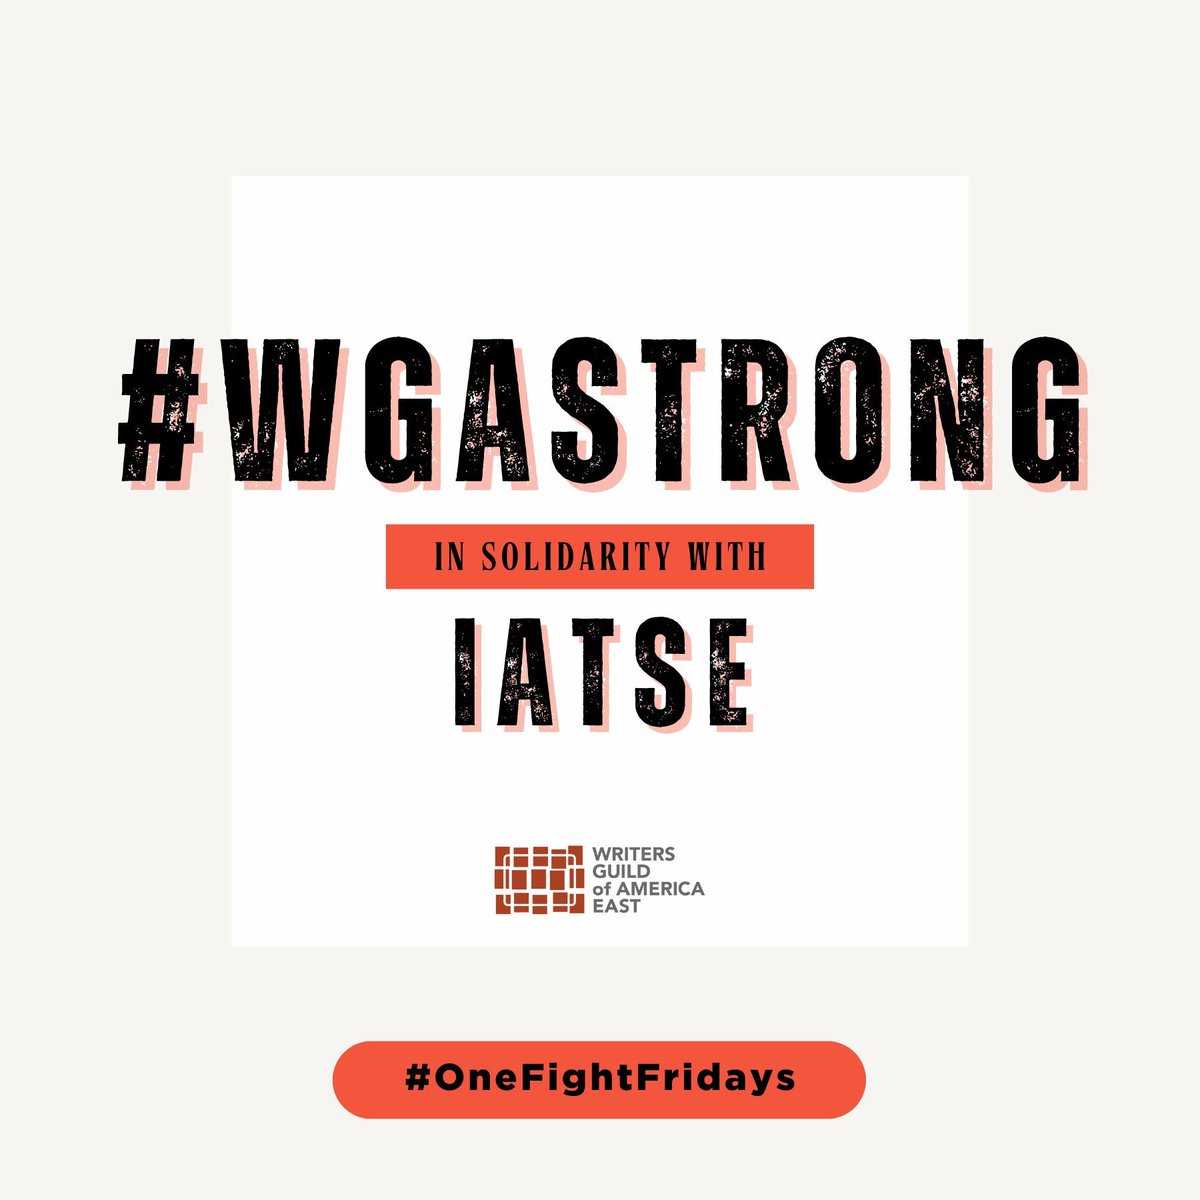 The WGA supports our union siblings in @IATSE, who are currently negotiating with the AMPTP on issues like wage increases, pension and health contributions, AI, and more. Show your support by wearing union swag on #OneFightFridays! ✊ #1u #WGAstrong #IASolidarity